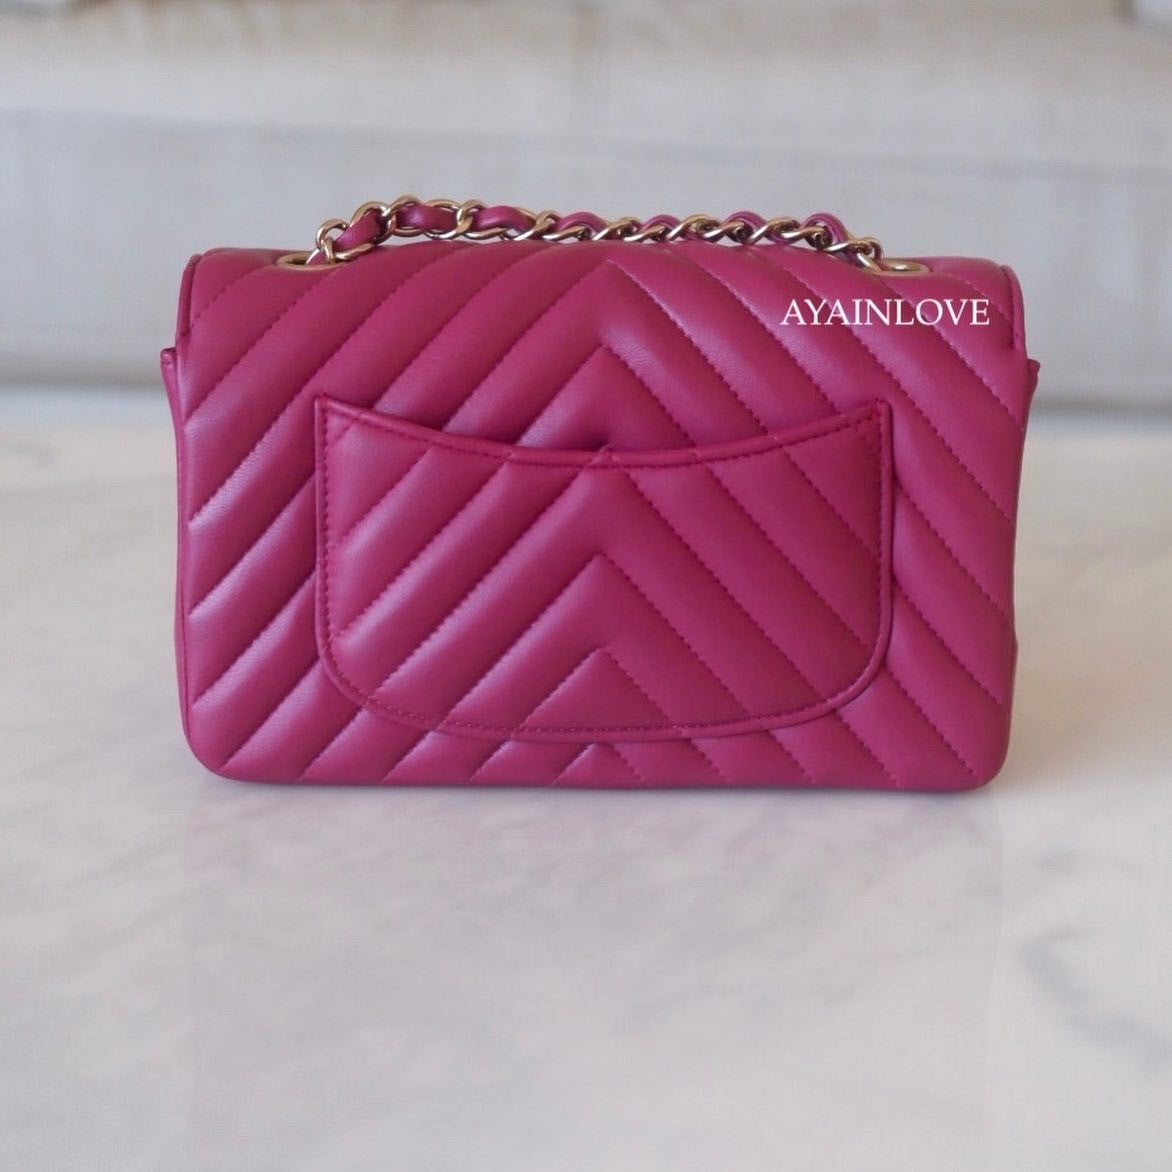 Chanel Pink Quilted Lambskin Mini Square Flap Bag Pale Gold Hardware, 2022